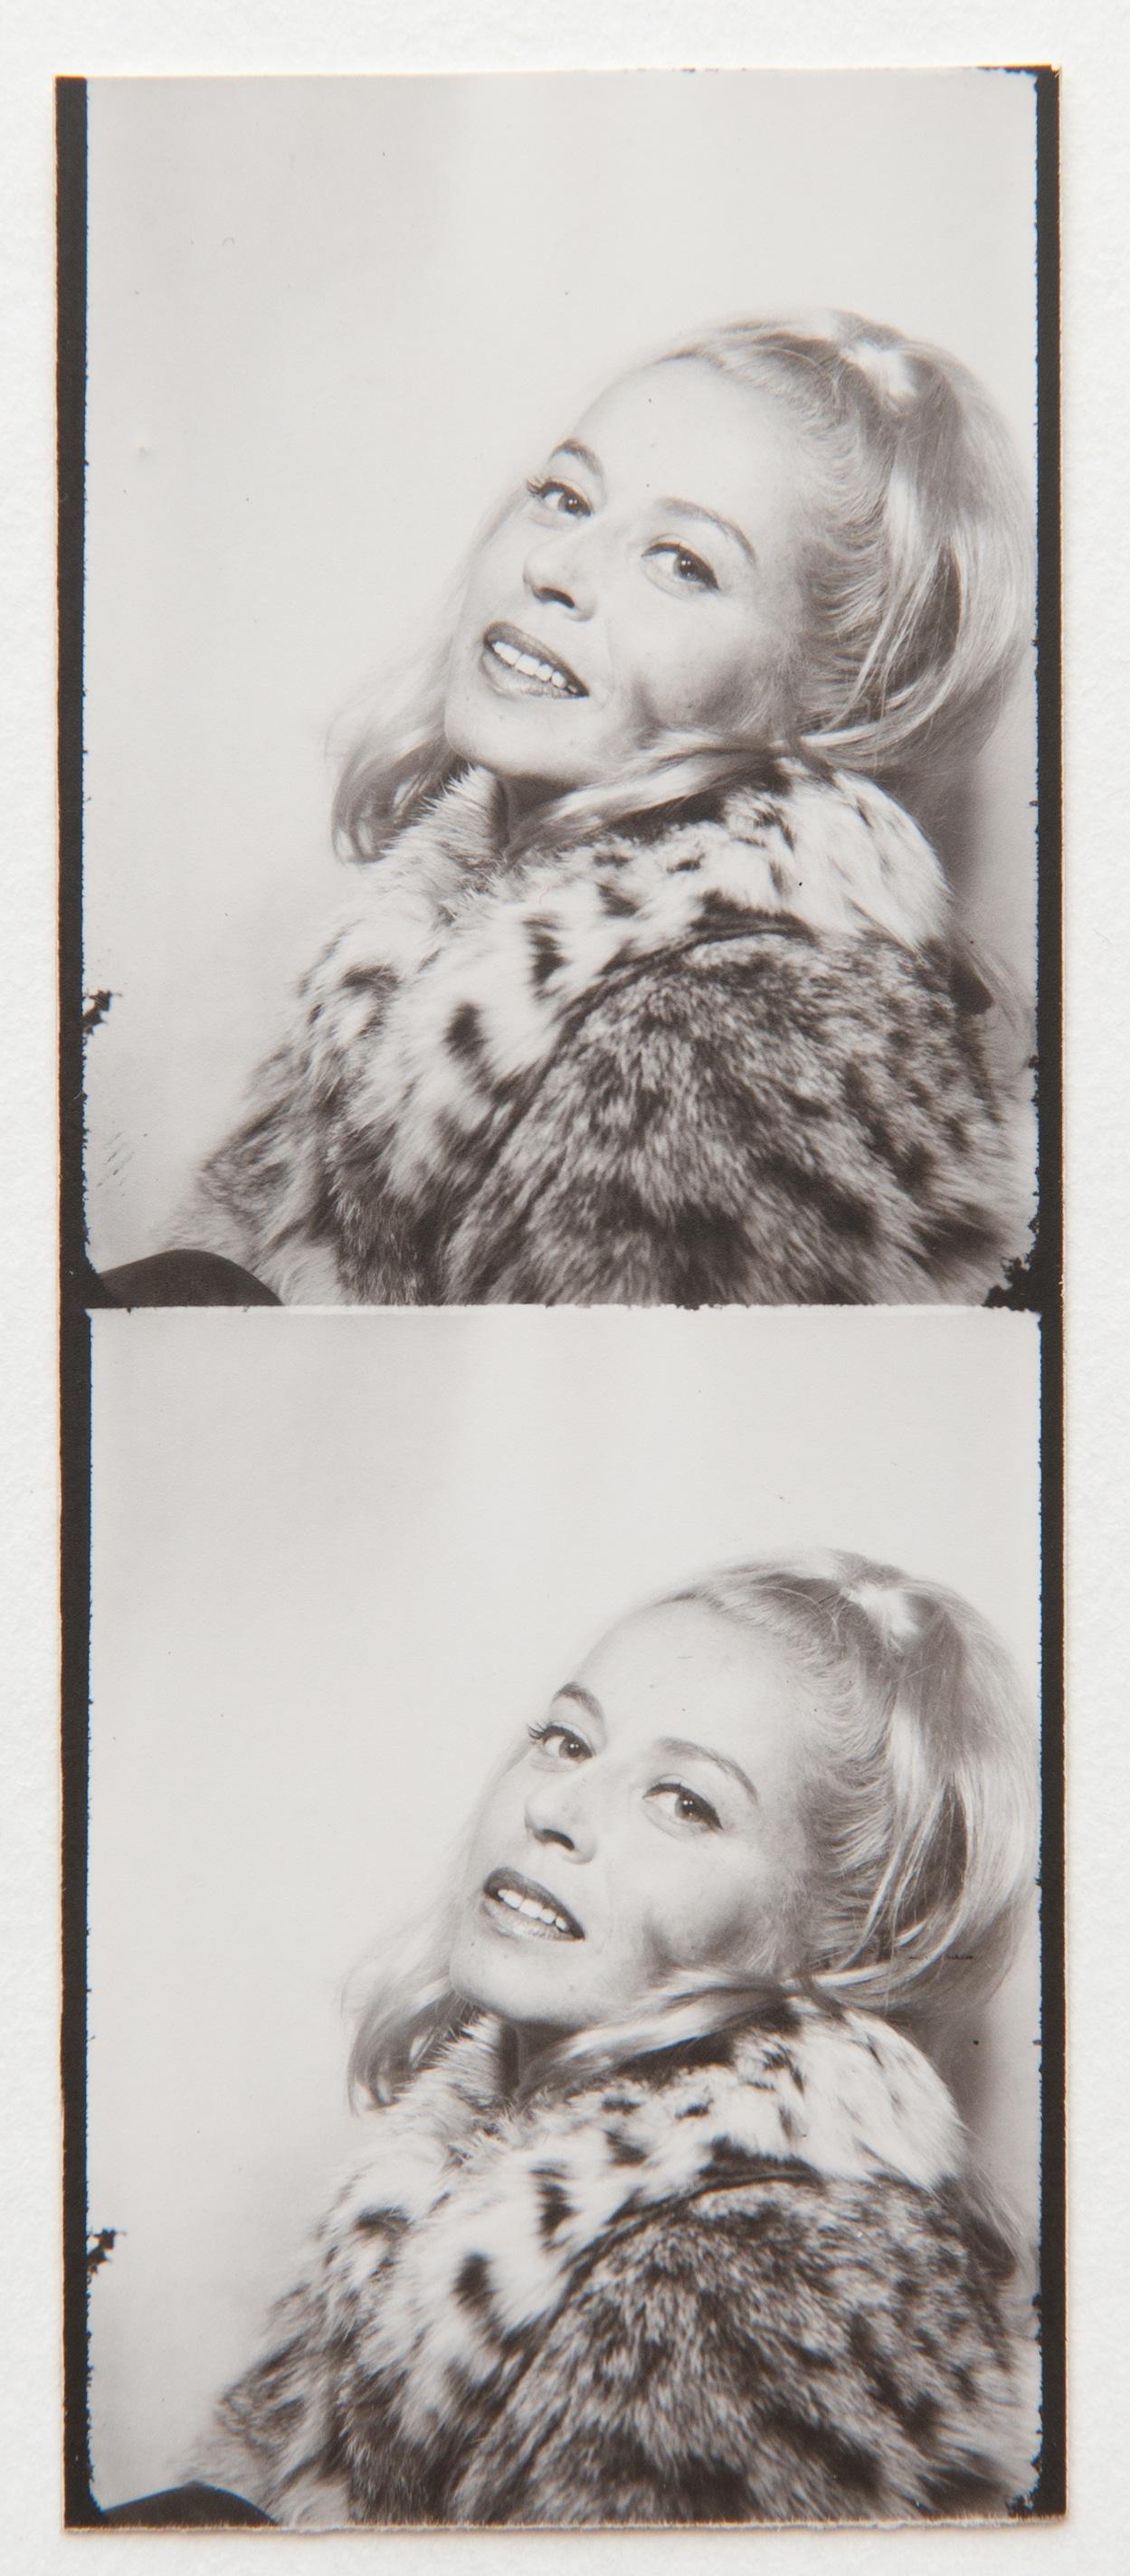 Andy Warhol, Photo Booth Strip of Holly Solomon, 1963